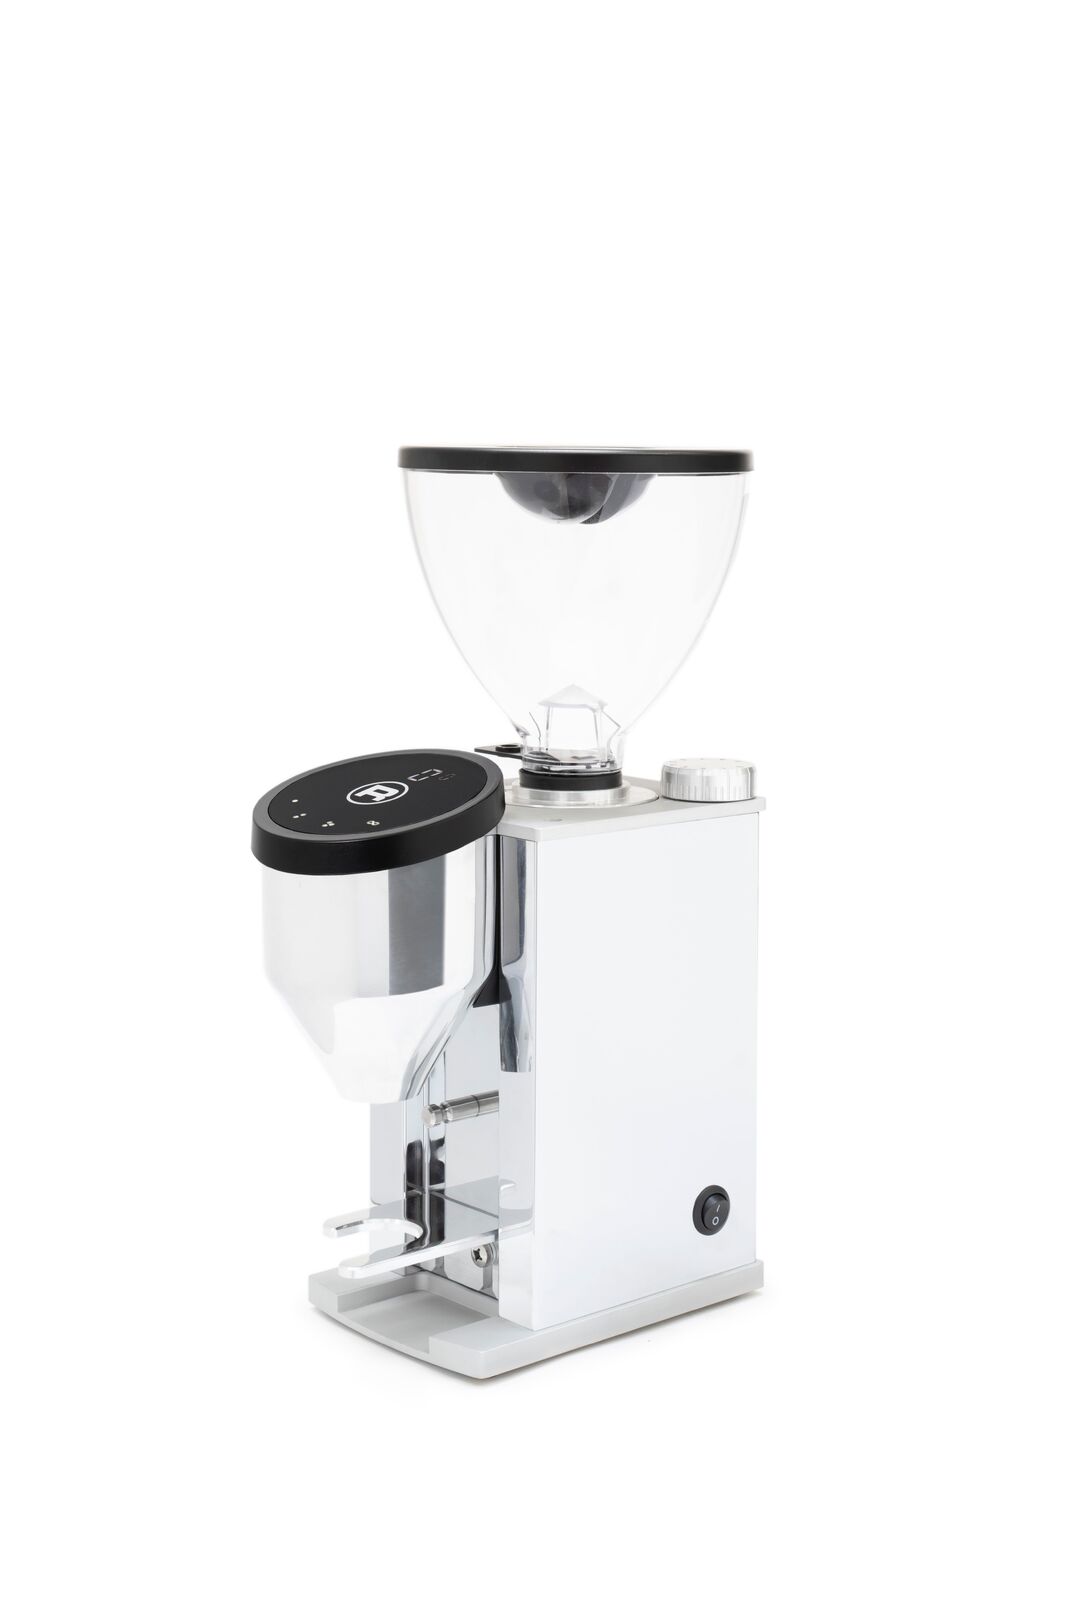 NEW Rocket Espresso Faustino Grinder 3.1 - The Beanery